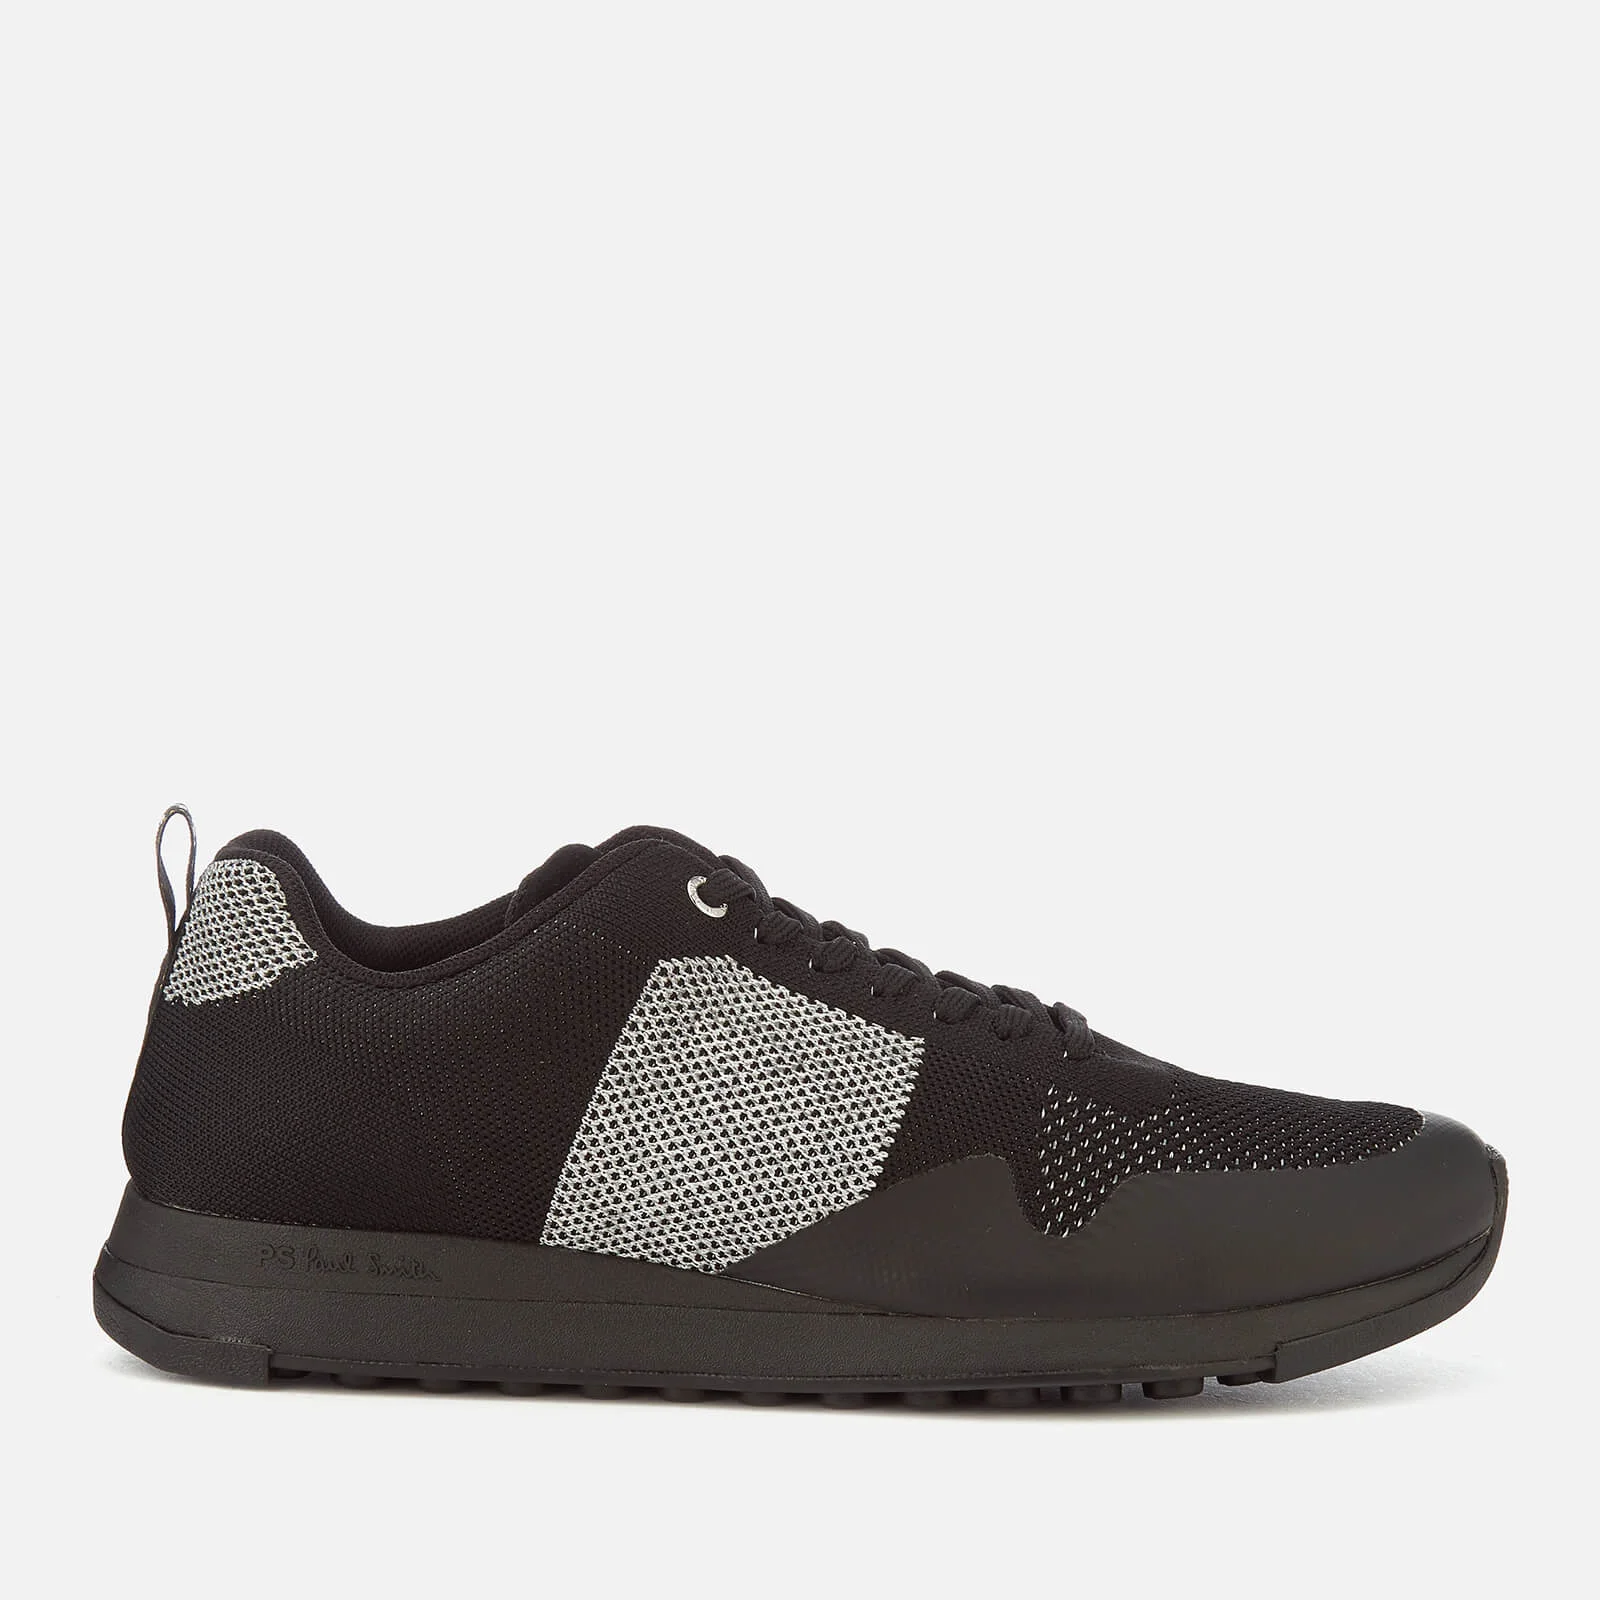 PS Paul Smith Men's Rappid Runner Style Trainers - Black Image 1